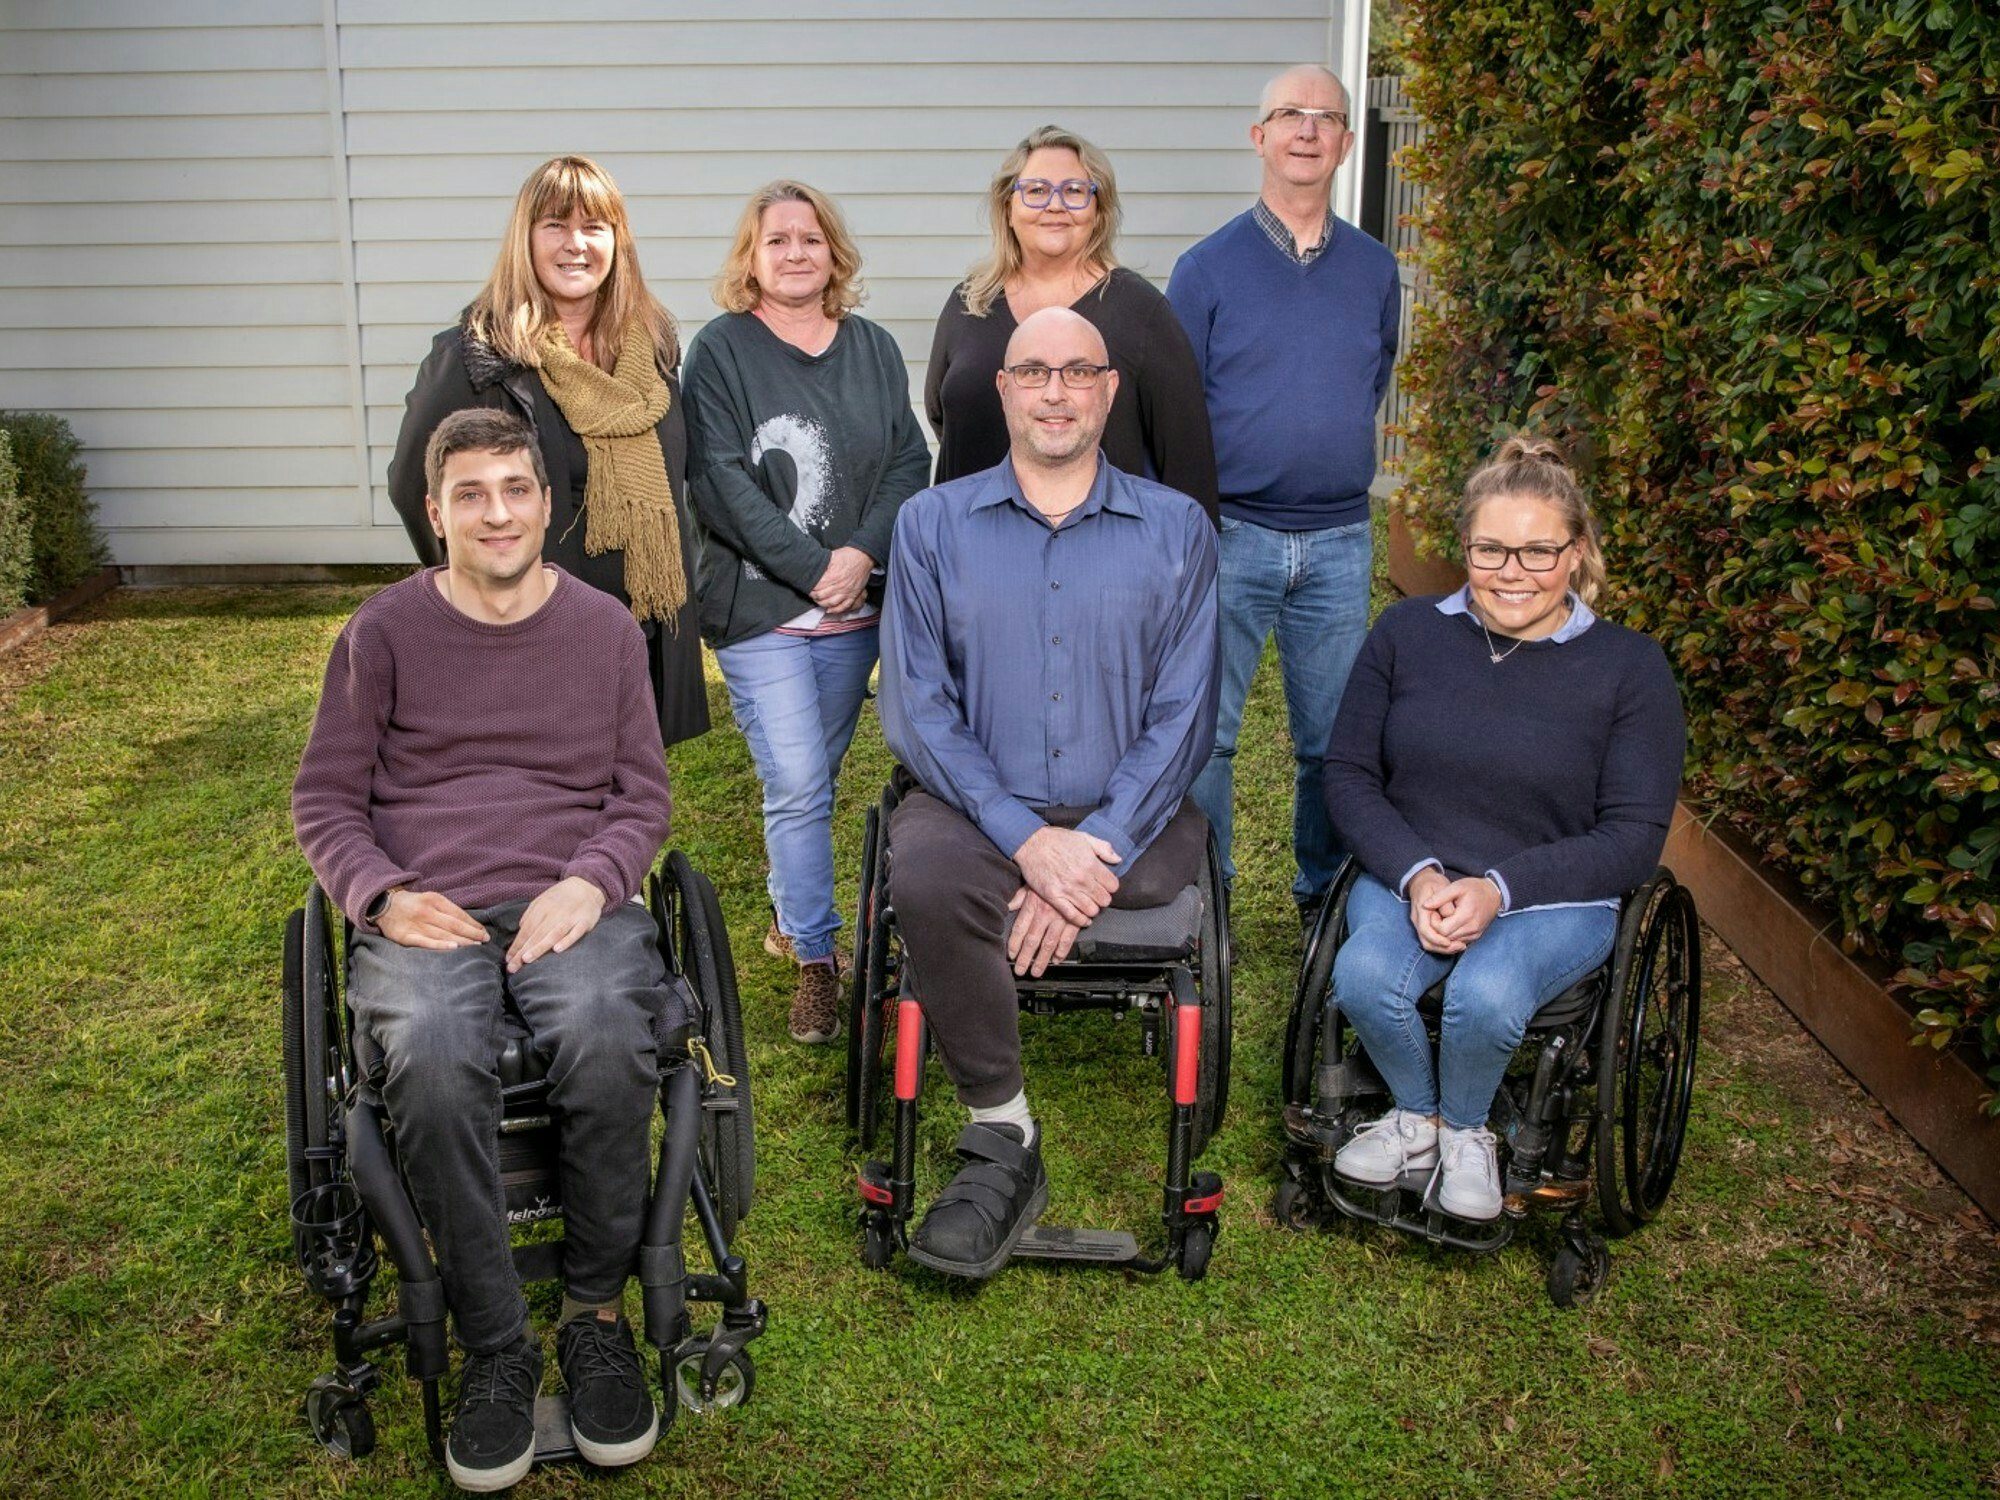 Accessible Accommodation team have lived experience with disabilities themselves, uniquely placed to understand their guests mobility needs. [Source: Accessible Accommodation]
